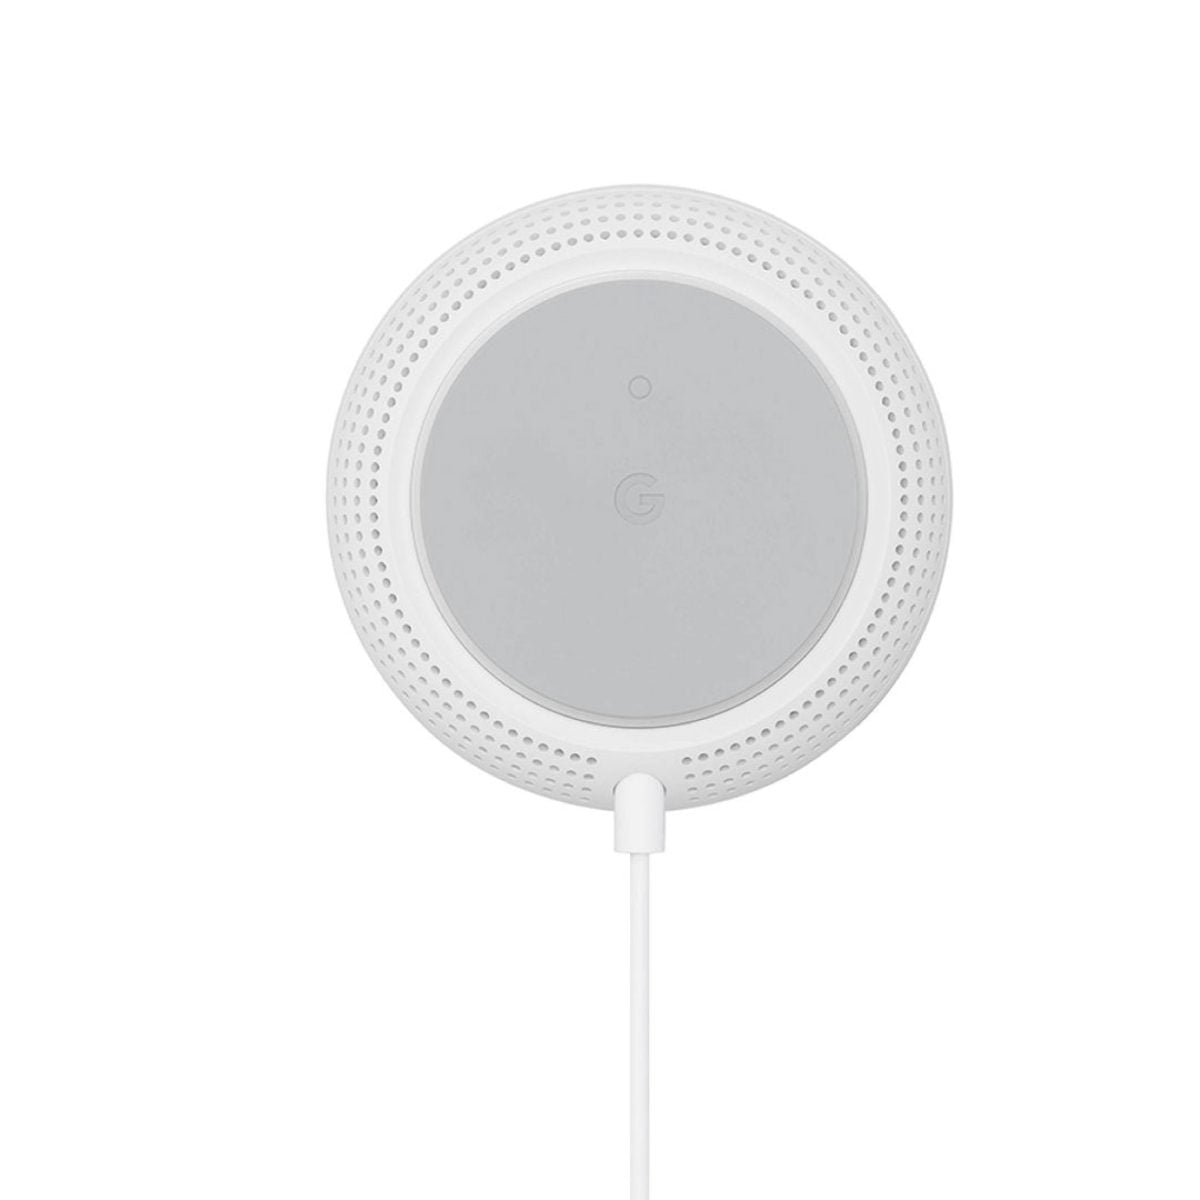 Dsd2212 07 Scaled Google Https://Youtu.be/Wsduj9Sm78K Google Nest Wifi Router And 2 Access Points (2020)